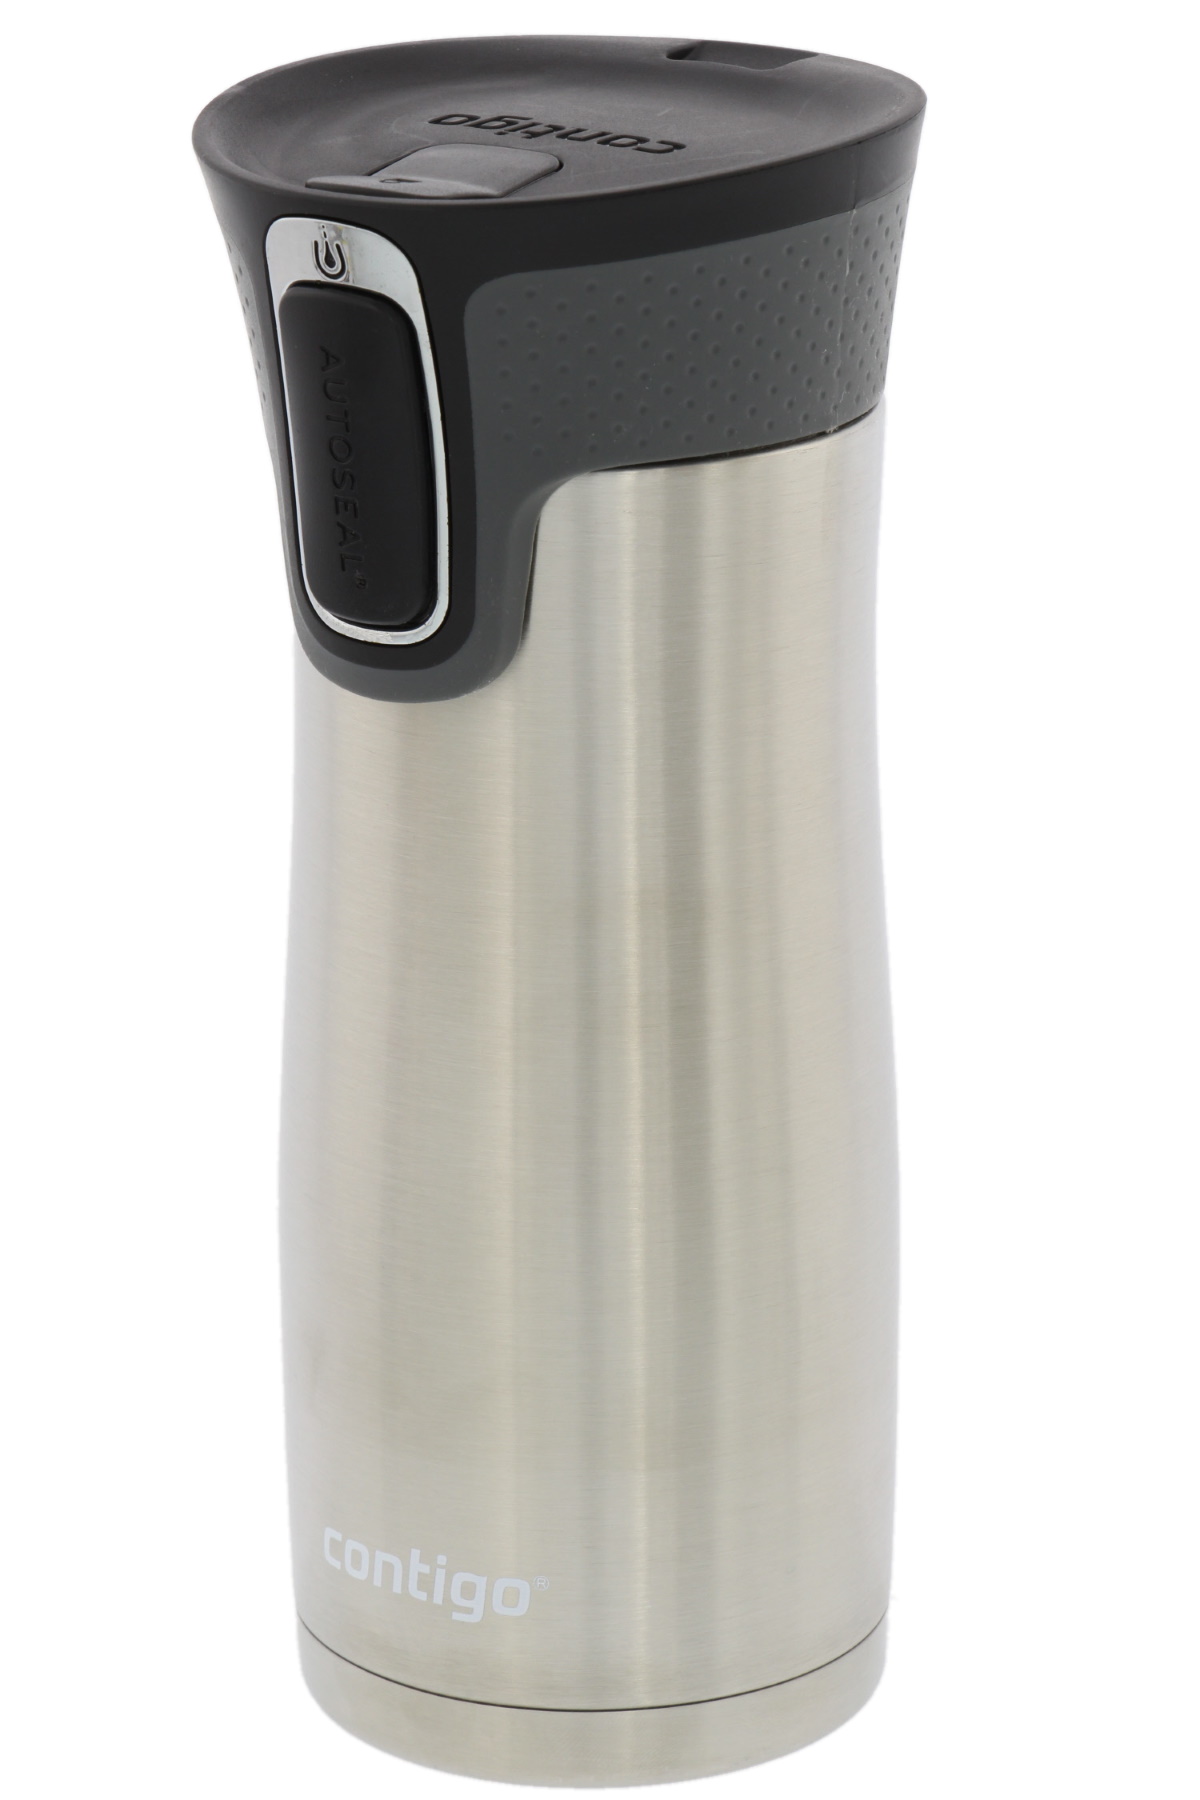 Contigo 16 Oz. Autoseal West Loop Vacuum-insulated Travel Mug with Easy Clean Lid, Stainless Steel - image 3 of 4